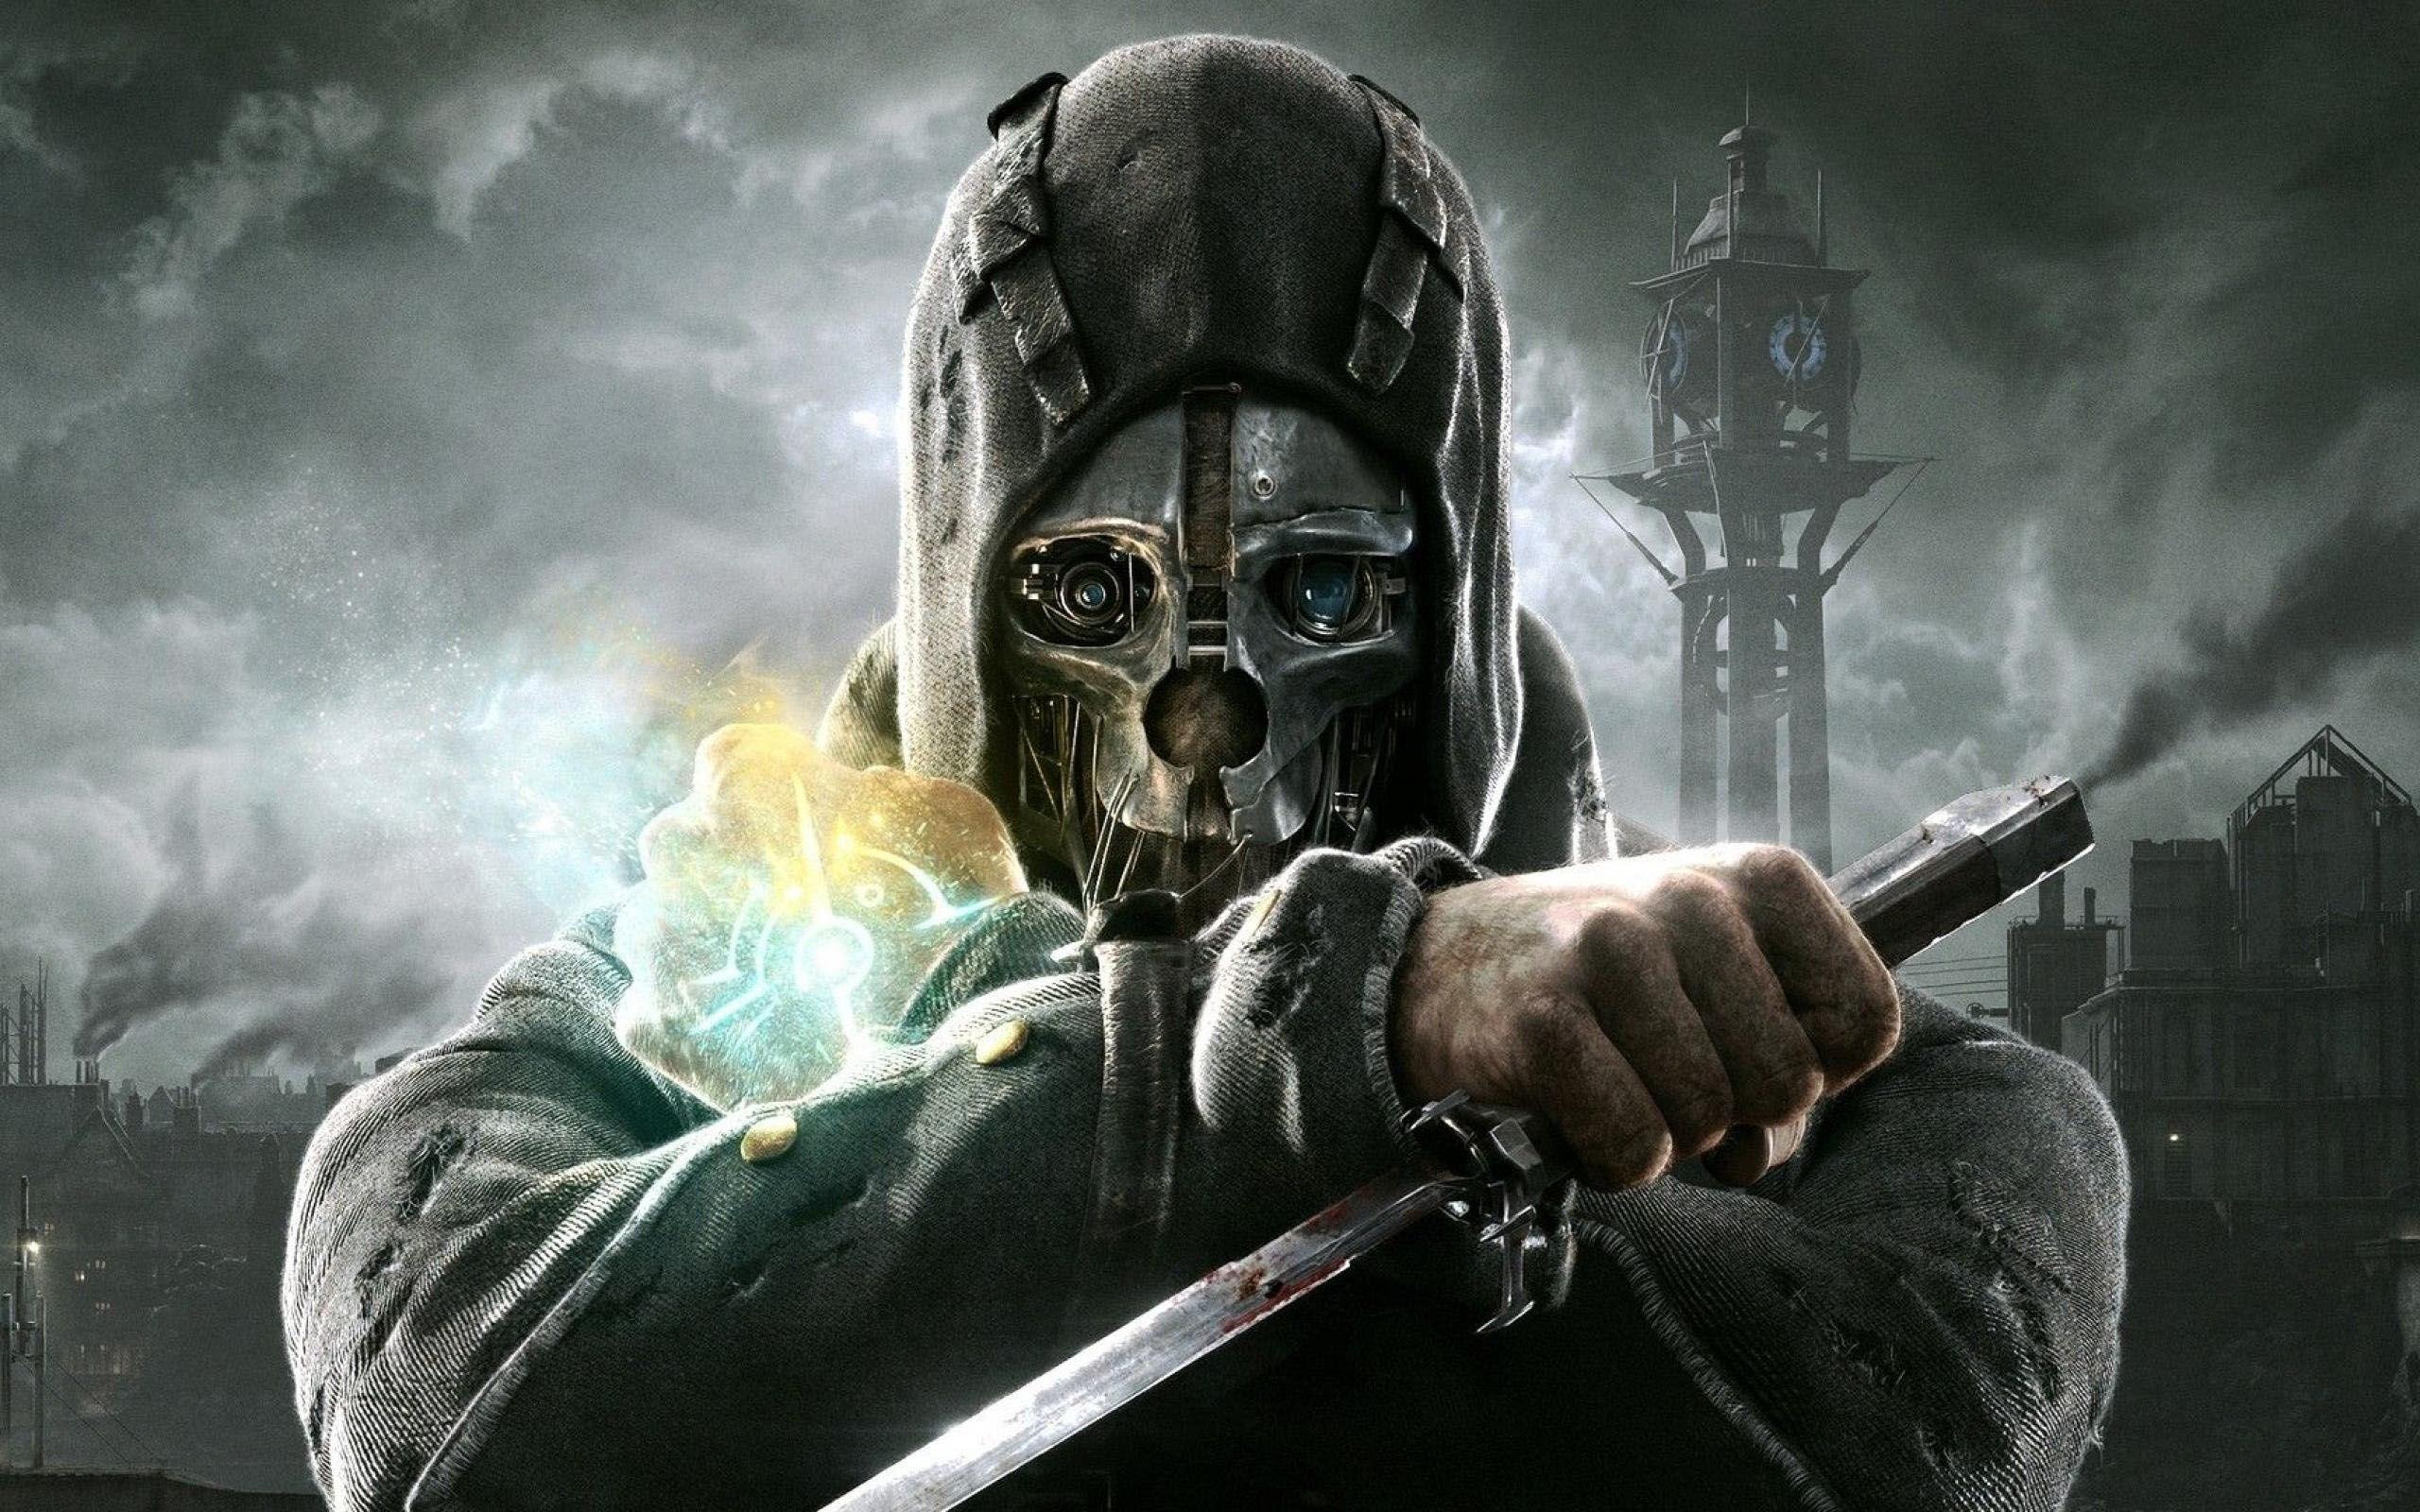 Corvo Attano from Dishonored, Game Art & Cosplay Gallery